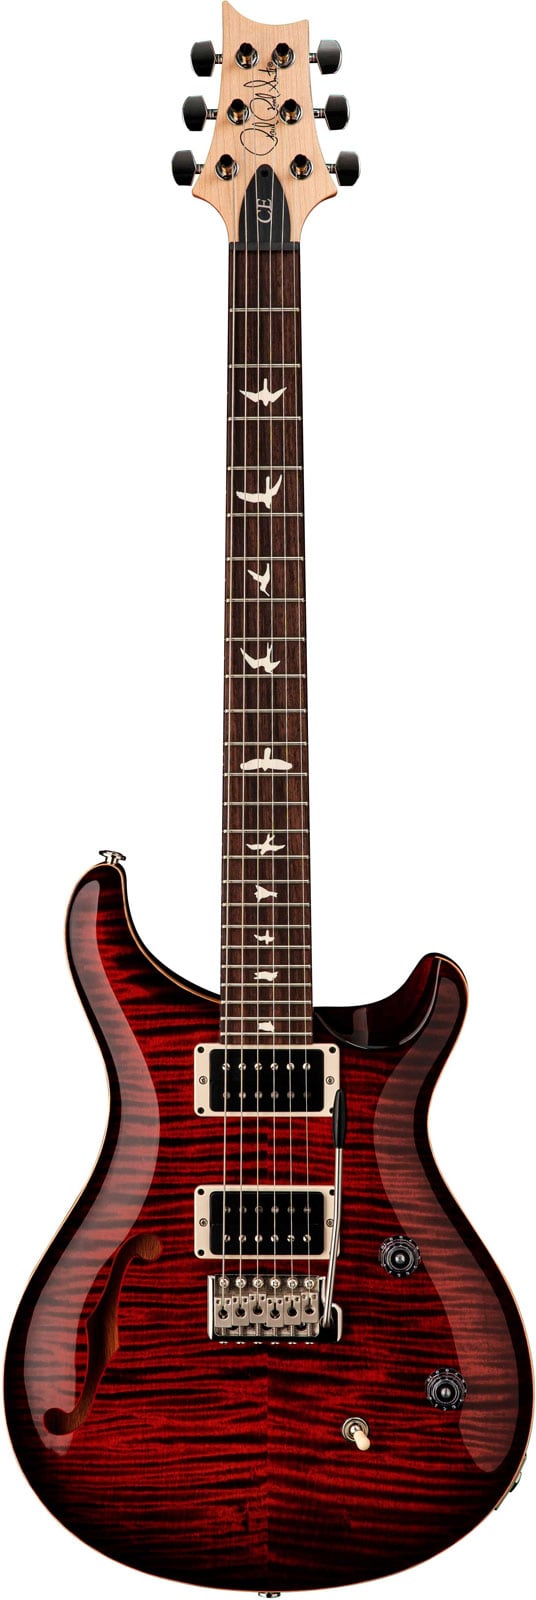 PRS - PAUL REED SMITH CE24 SH FIRE RED BURST